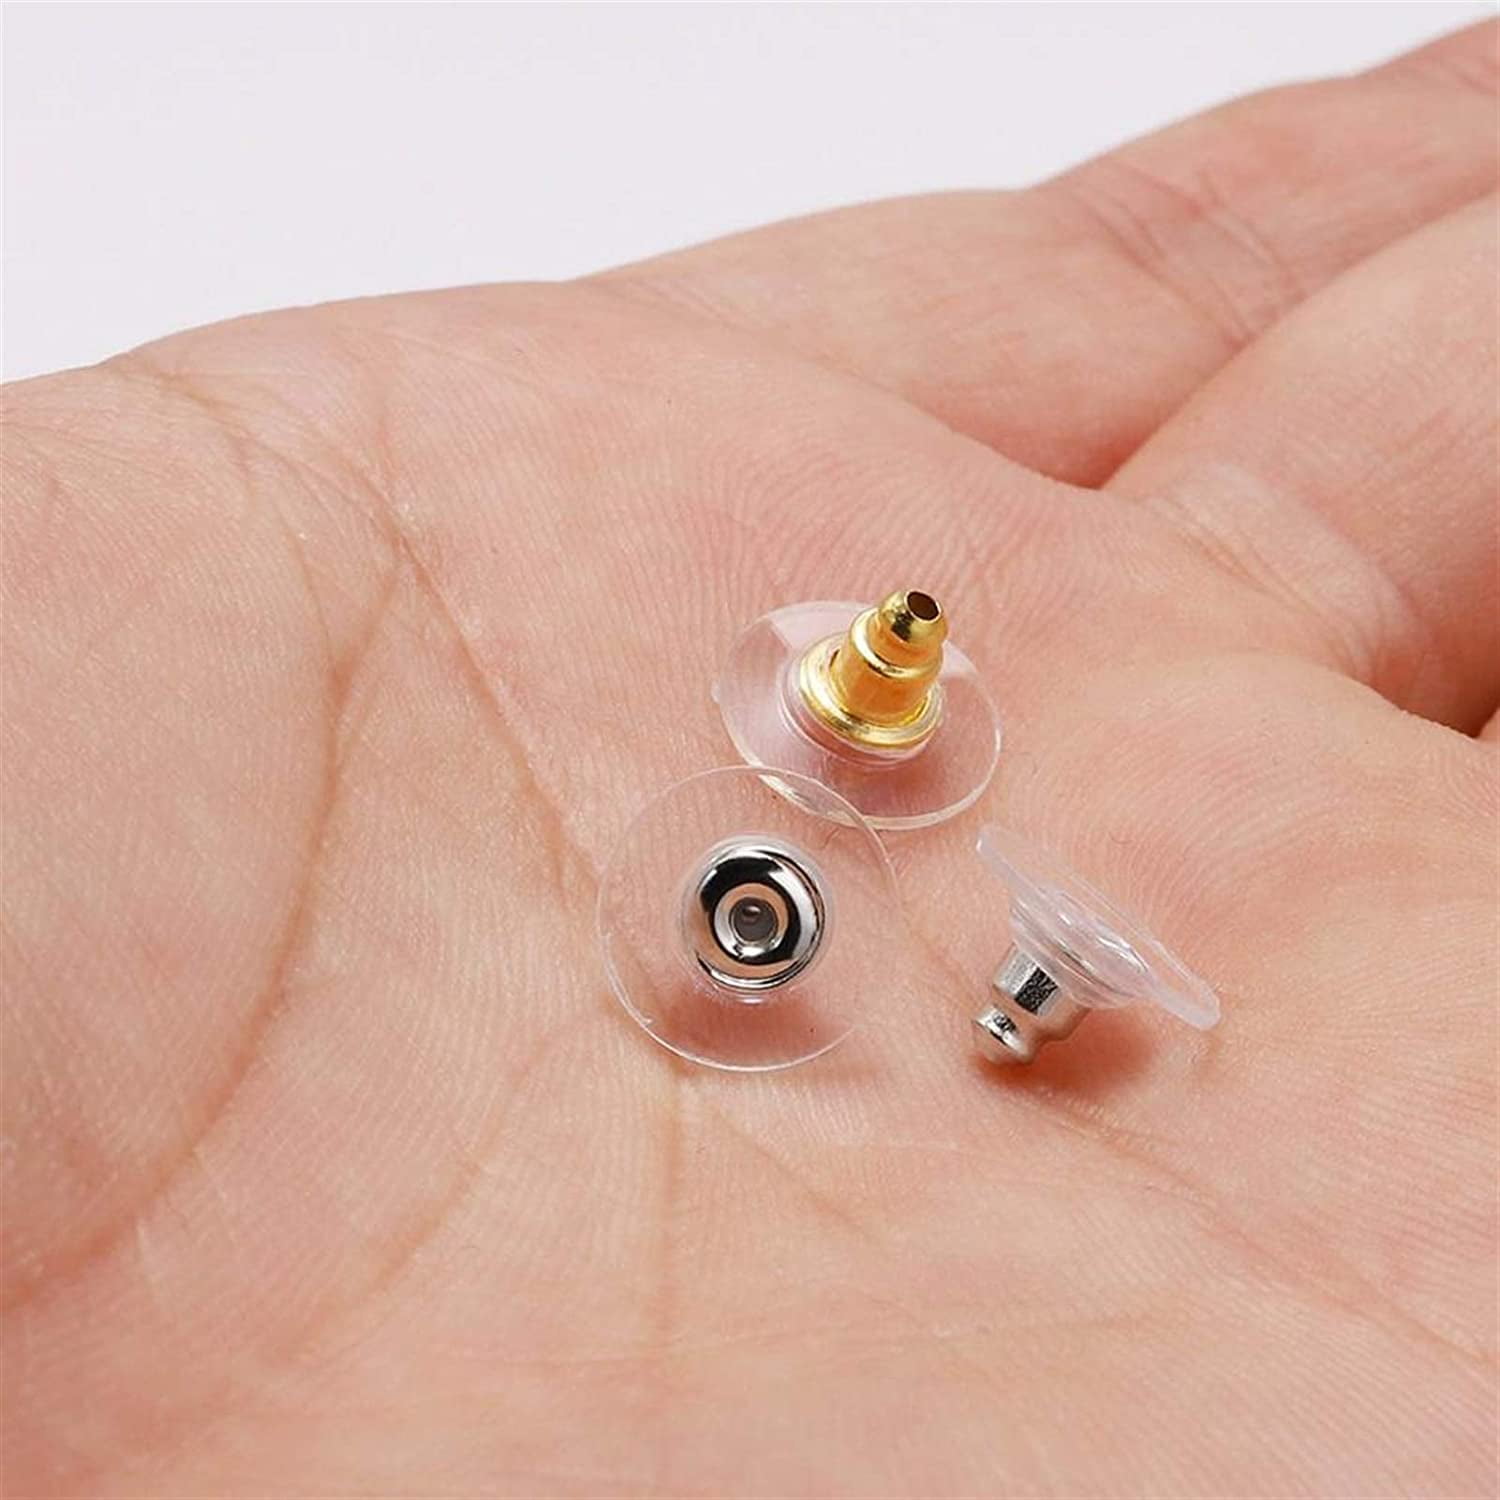 Clear Earrings For Sports 400Pcs 18g Plastic Earrings For Sensitive Ears  Clear Stud Earrings for Work with Solid Plastic Posts and Soft Rubber  Earring Backs in 2 Organizer Box  Walmartcom